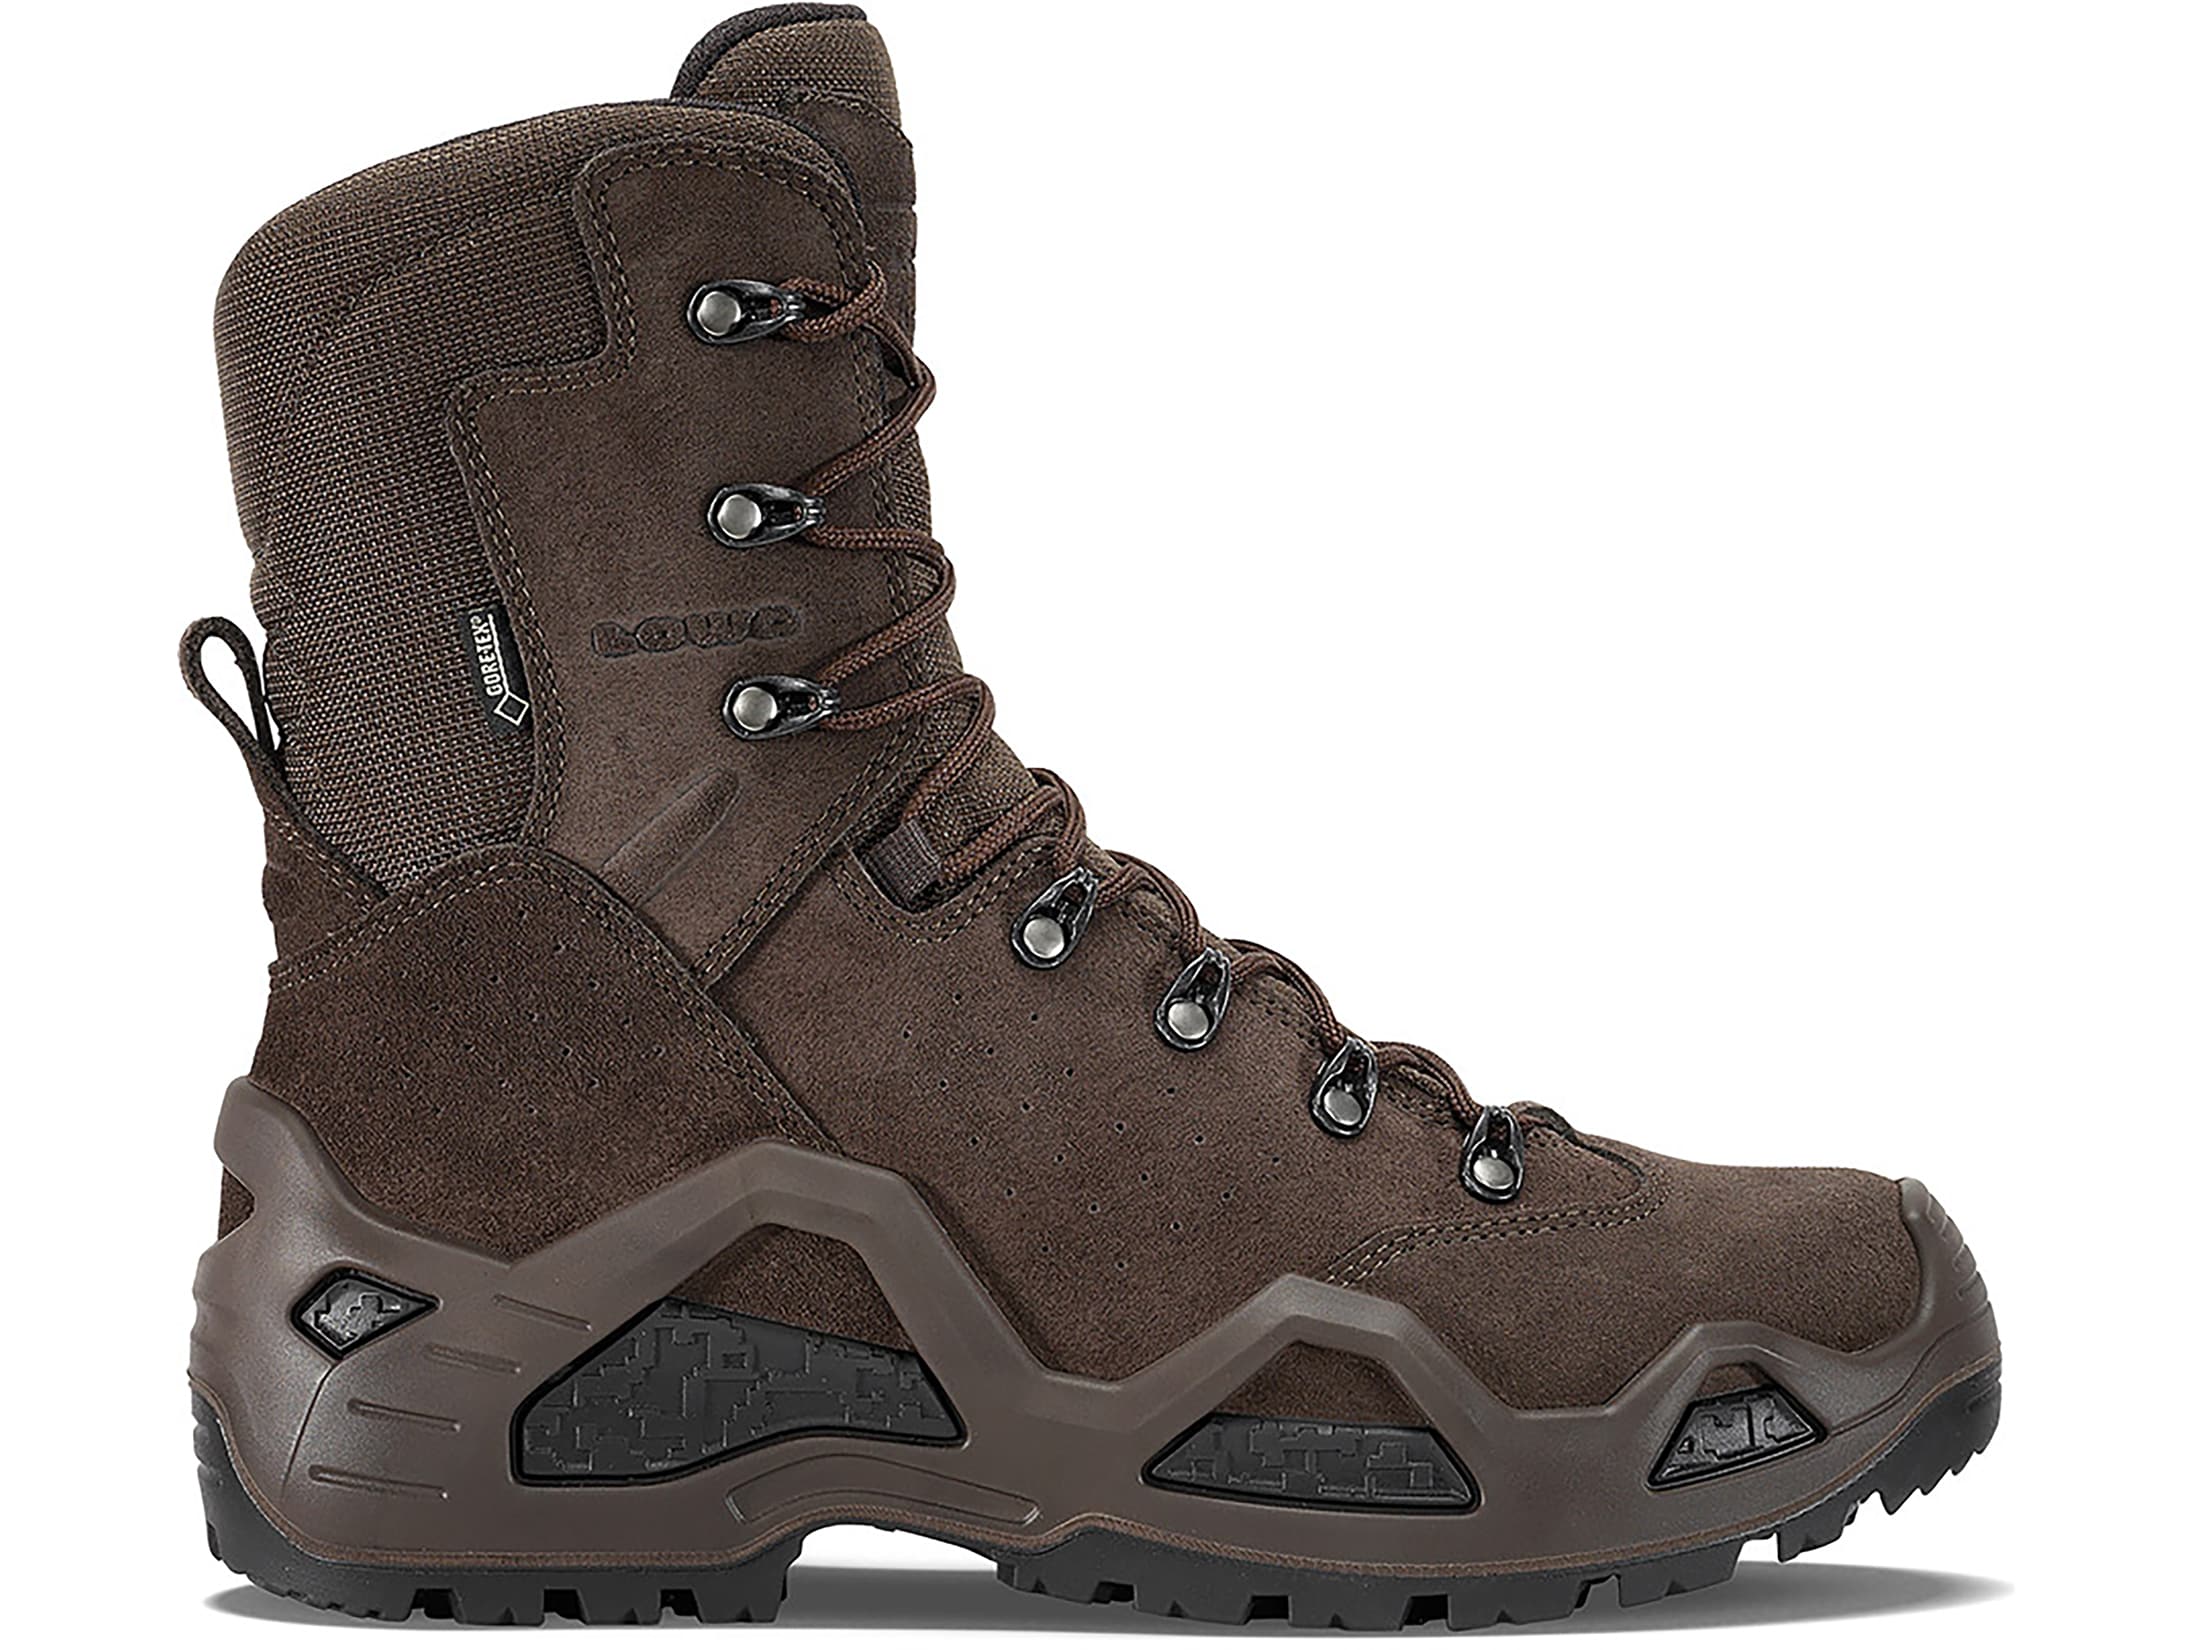 Lowa Z8-GTX C 8 GORE-TEX Hiking Boots Leather Coyote Men's 9.5 D